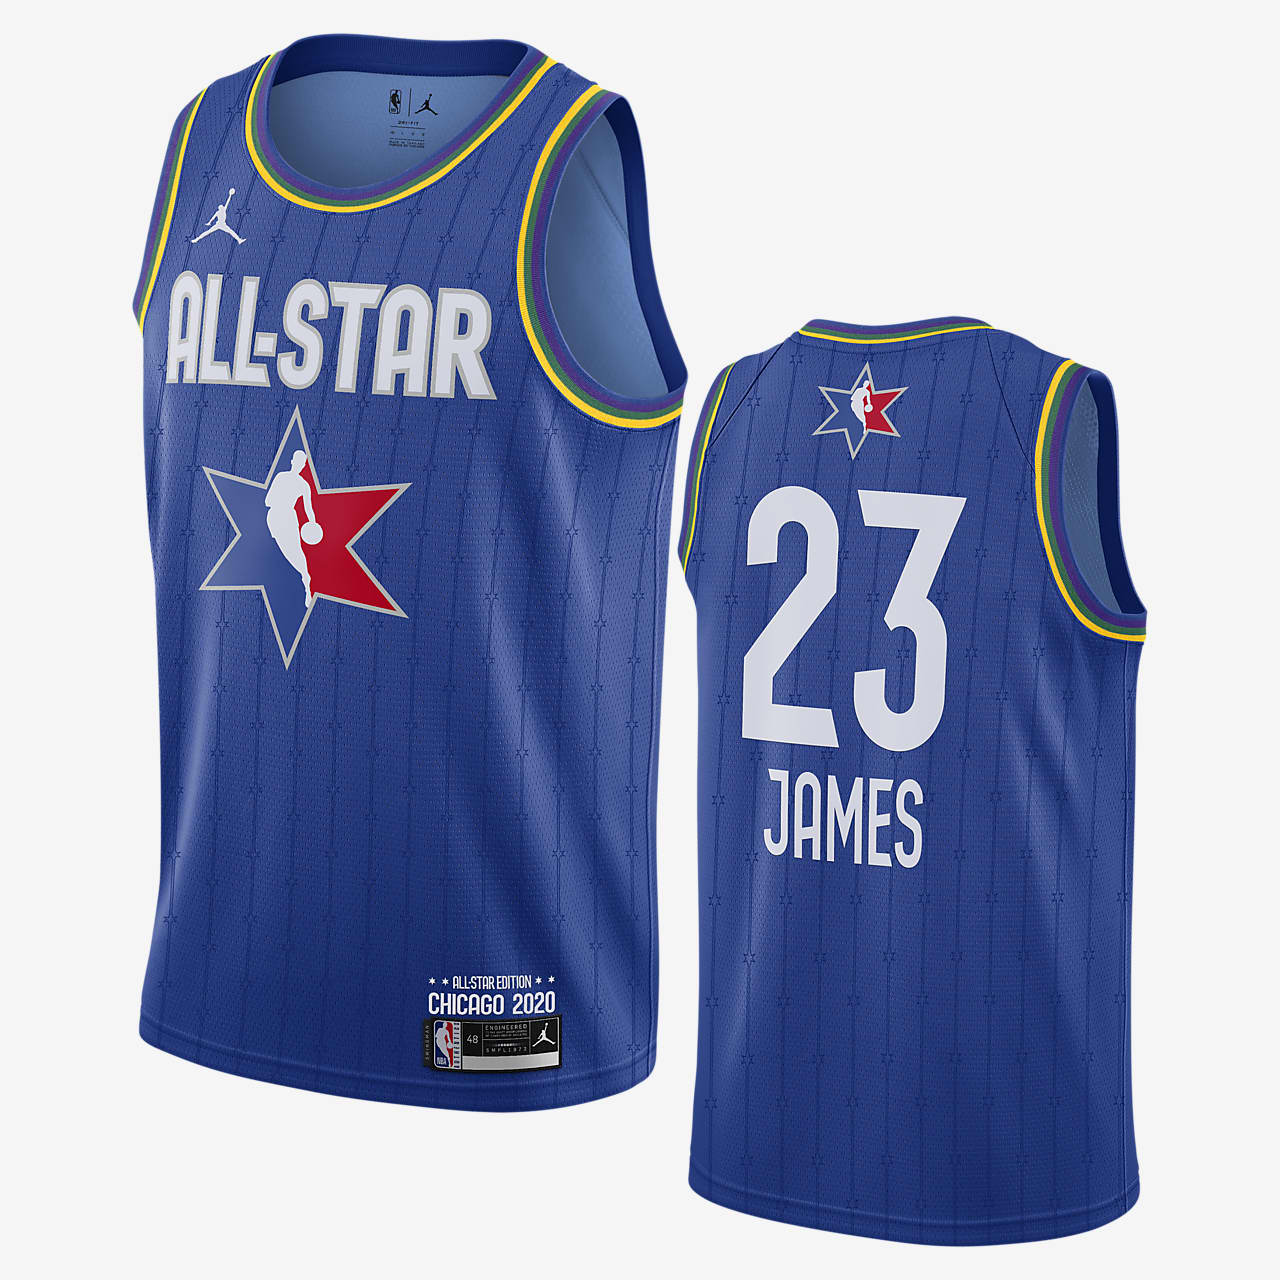 lebron james jersey all star